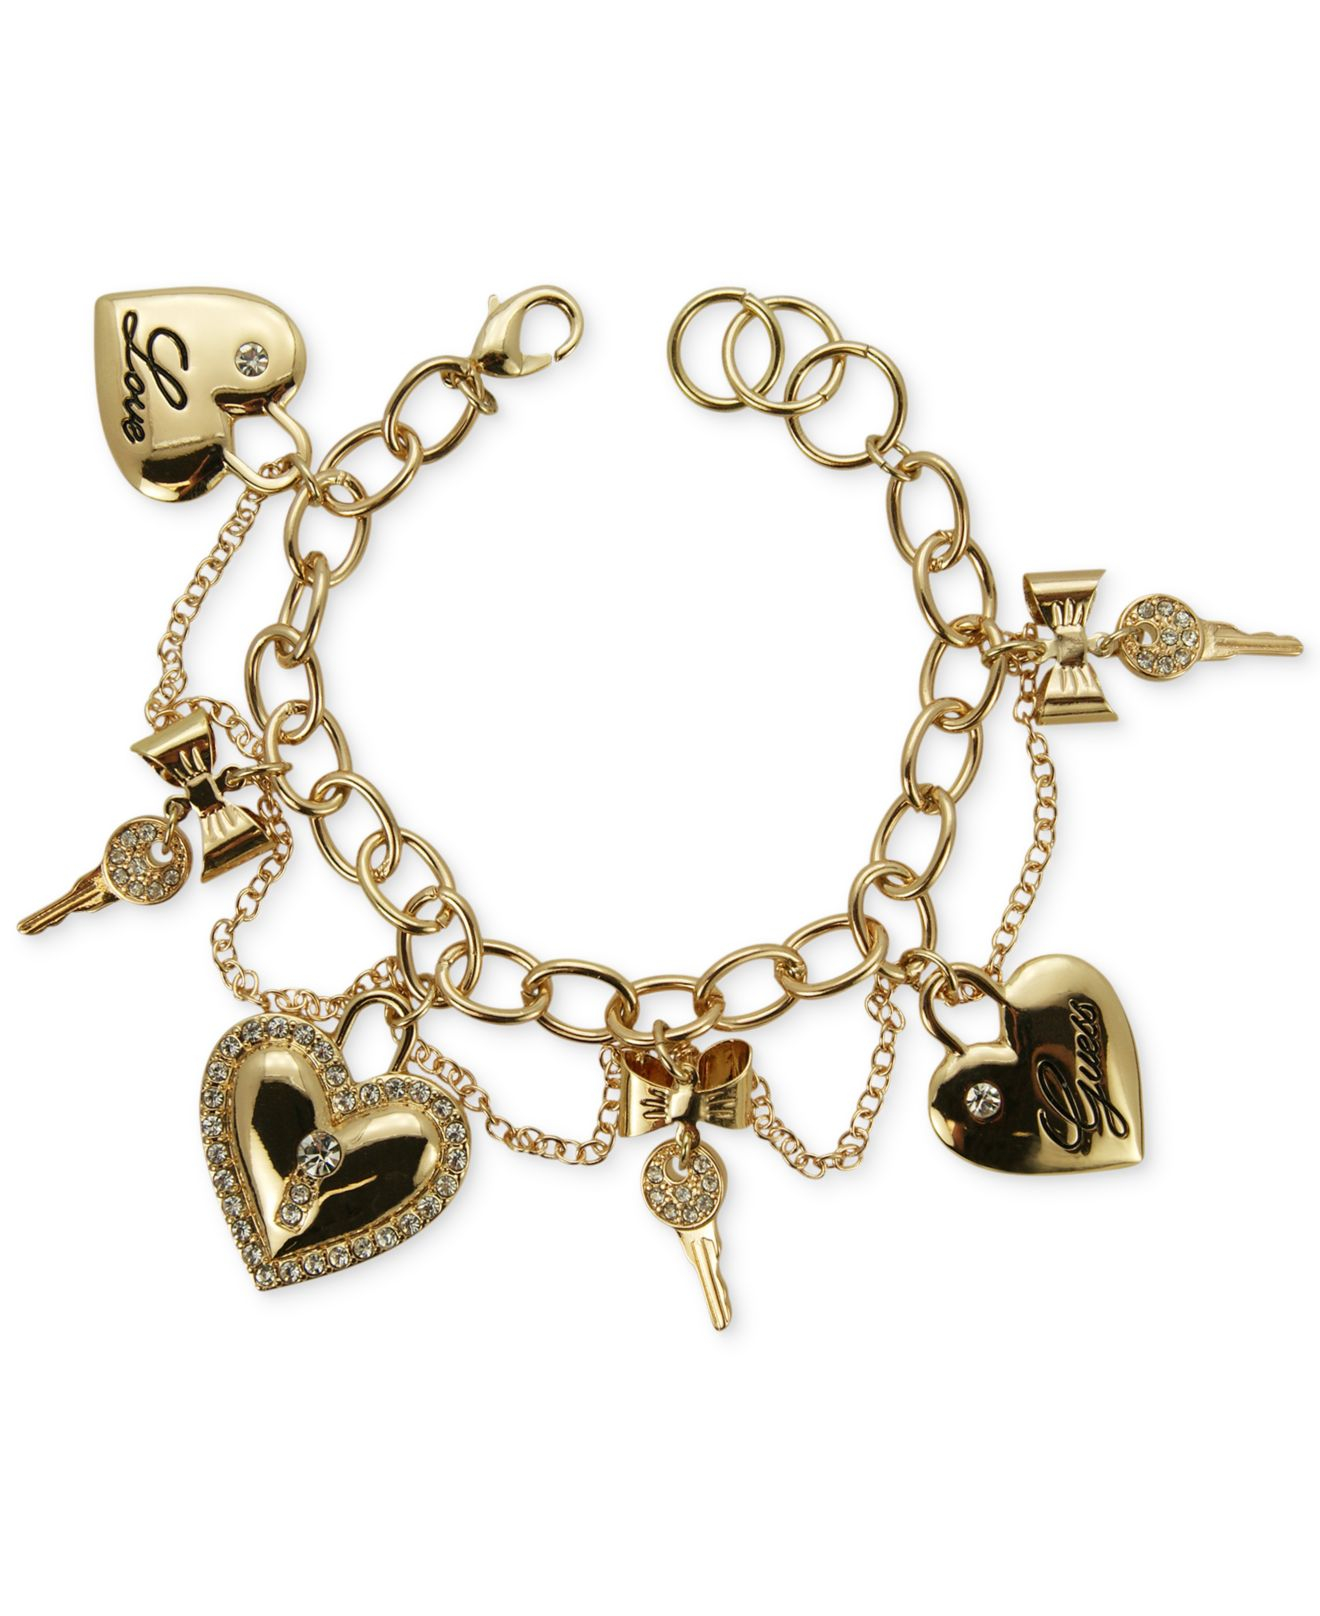 Guess Gold-Tone Heart And Key Charm Bracelet in Metallic - Lyst